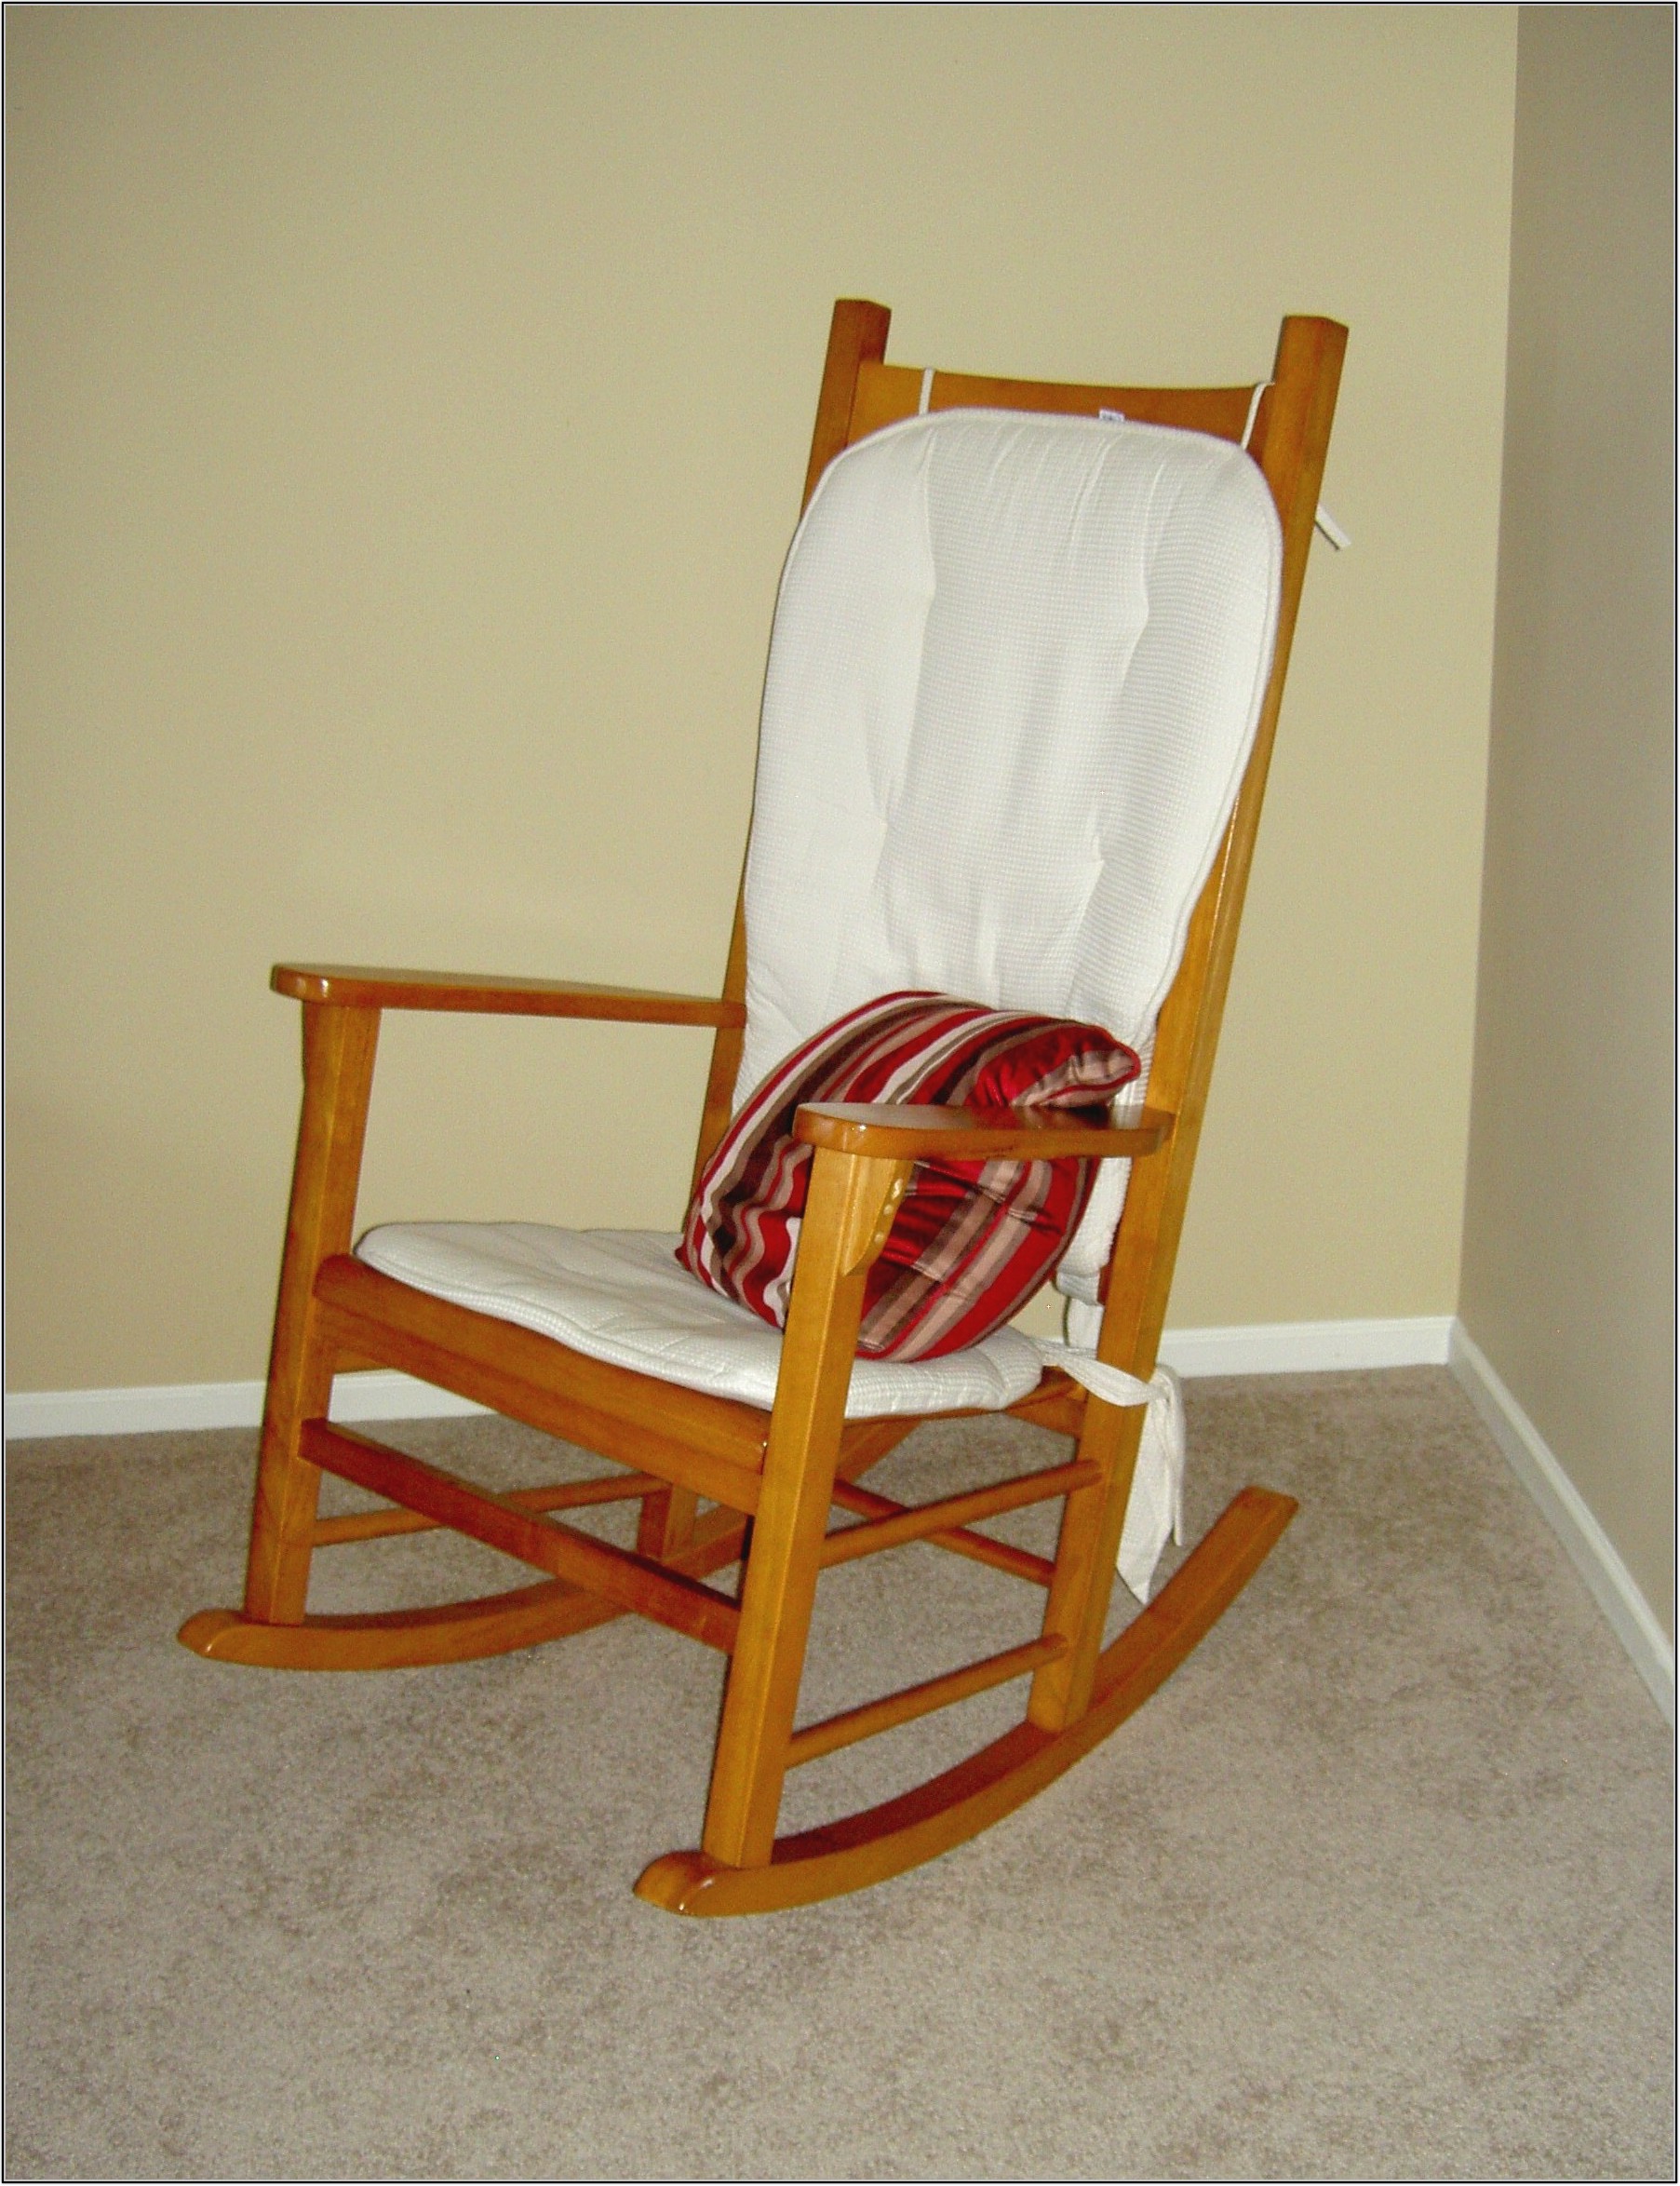 Baby Rocking Chair Singapore - Chairs : Home Design Ideas #4KVndeD5Wo15